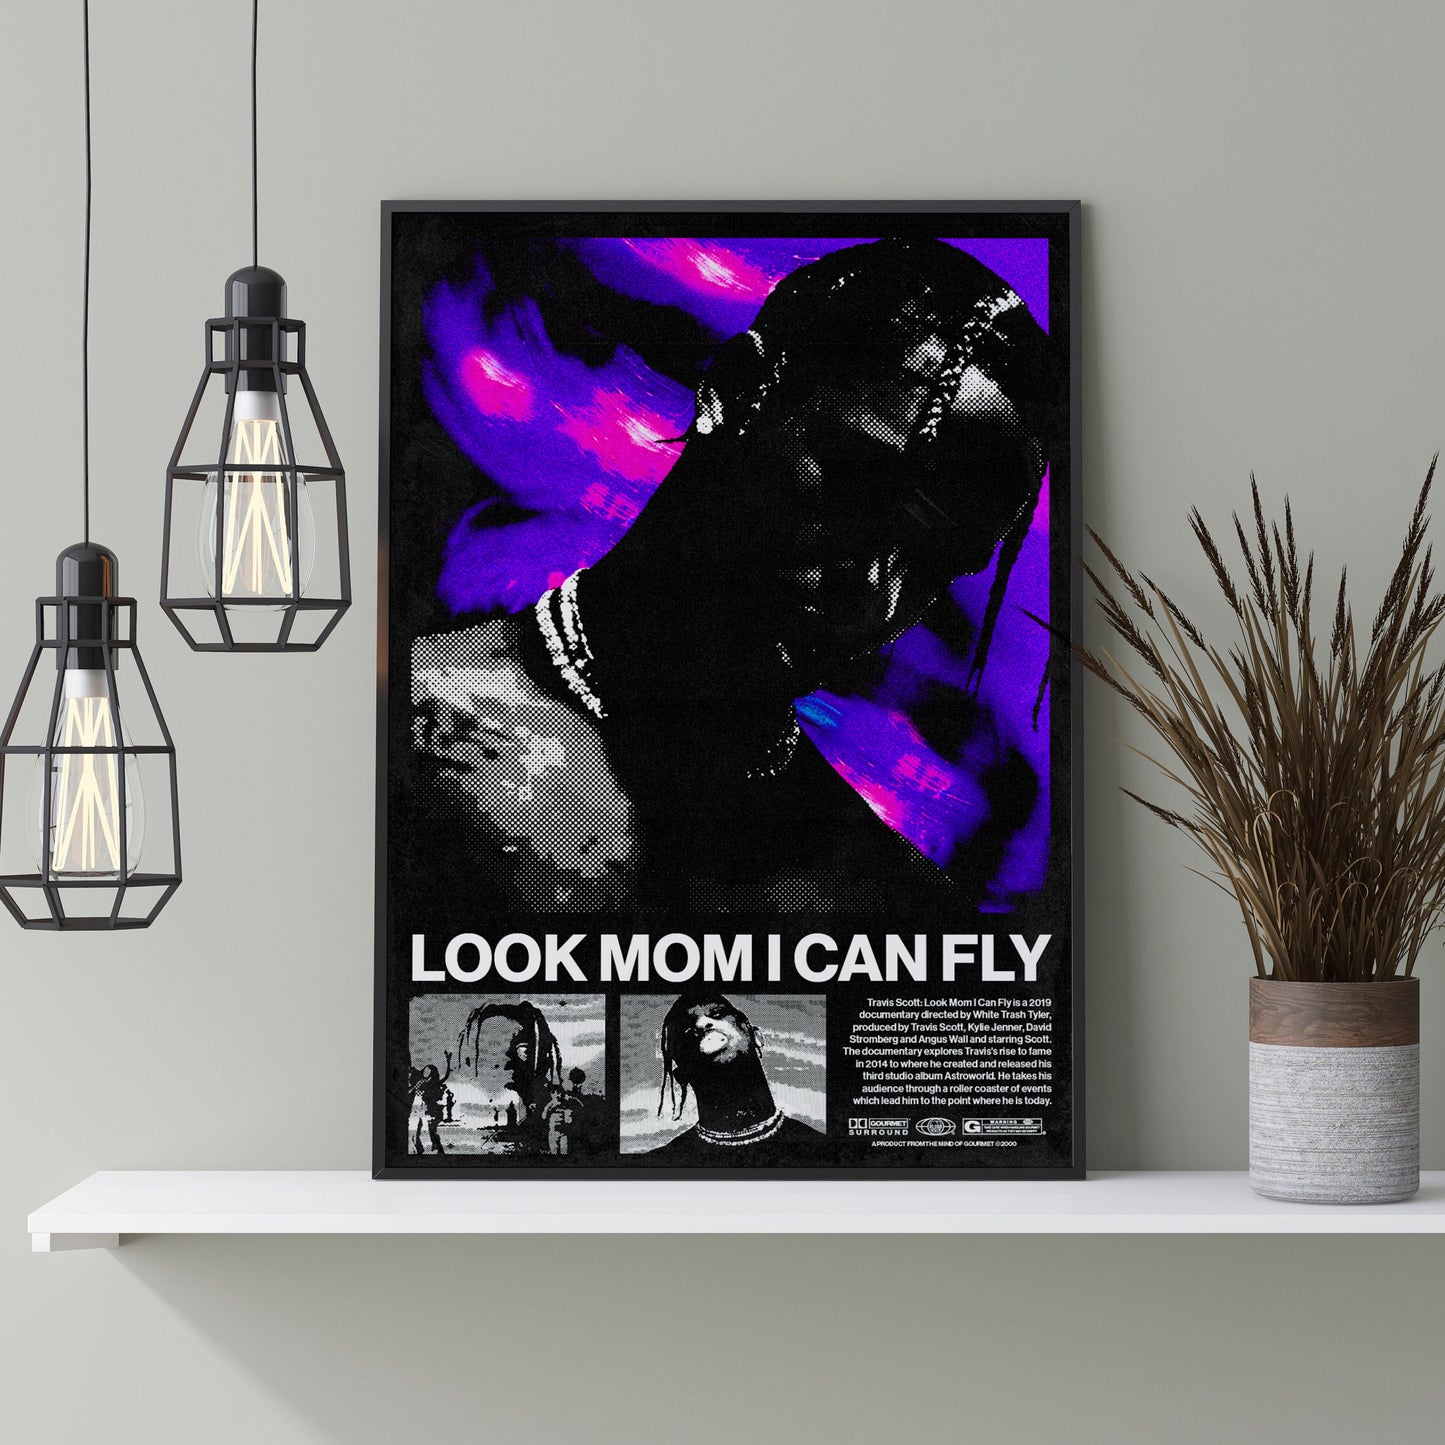 LOOK MOM I CAN FLY POSTER